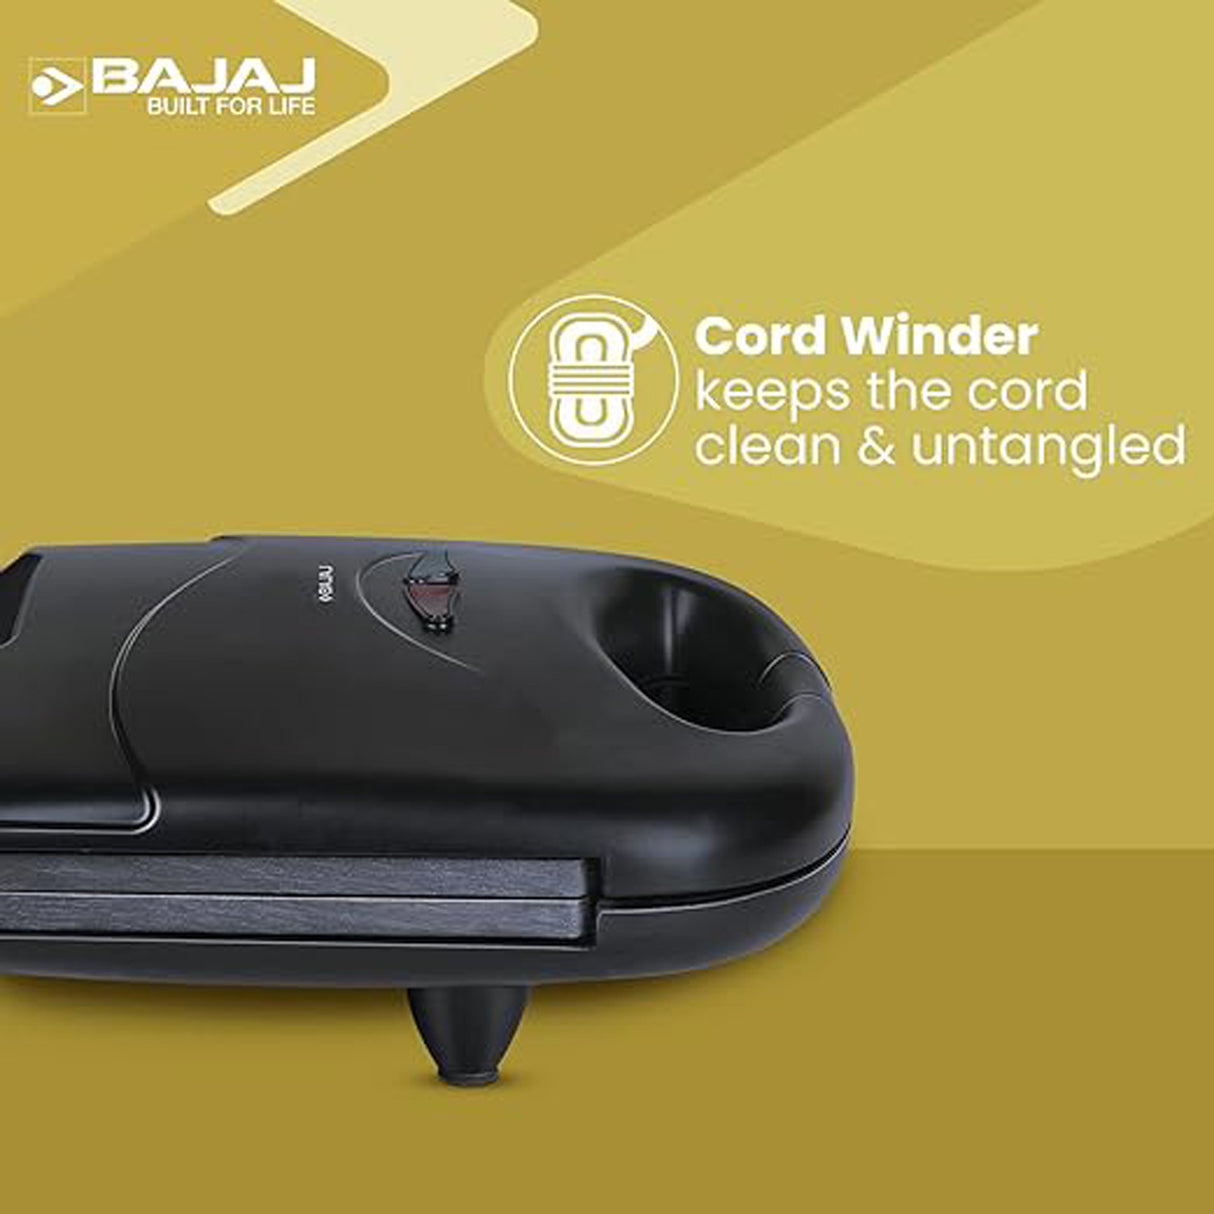 Sweet treat alert: Nutella and banana toast with Bajaj SWX 4 Deluxe!